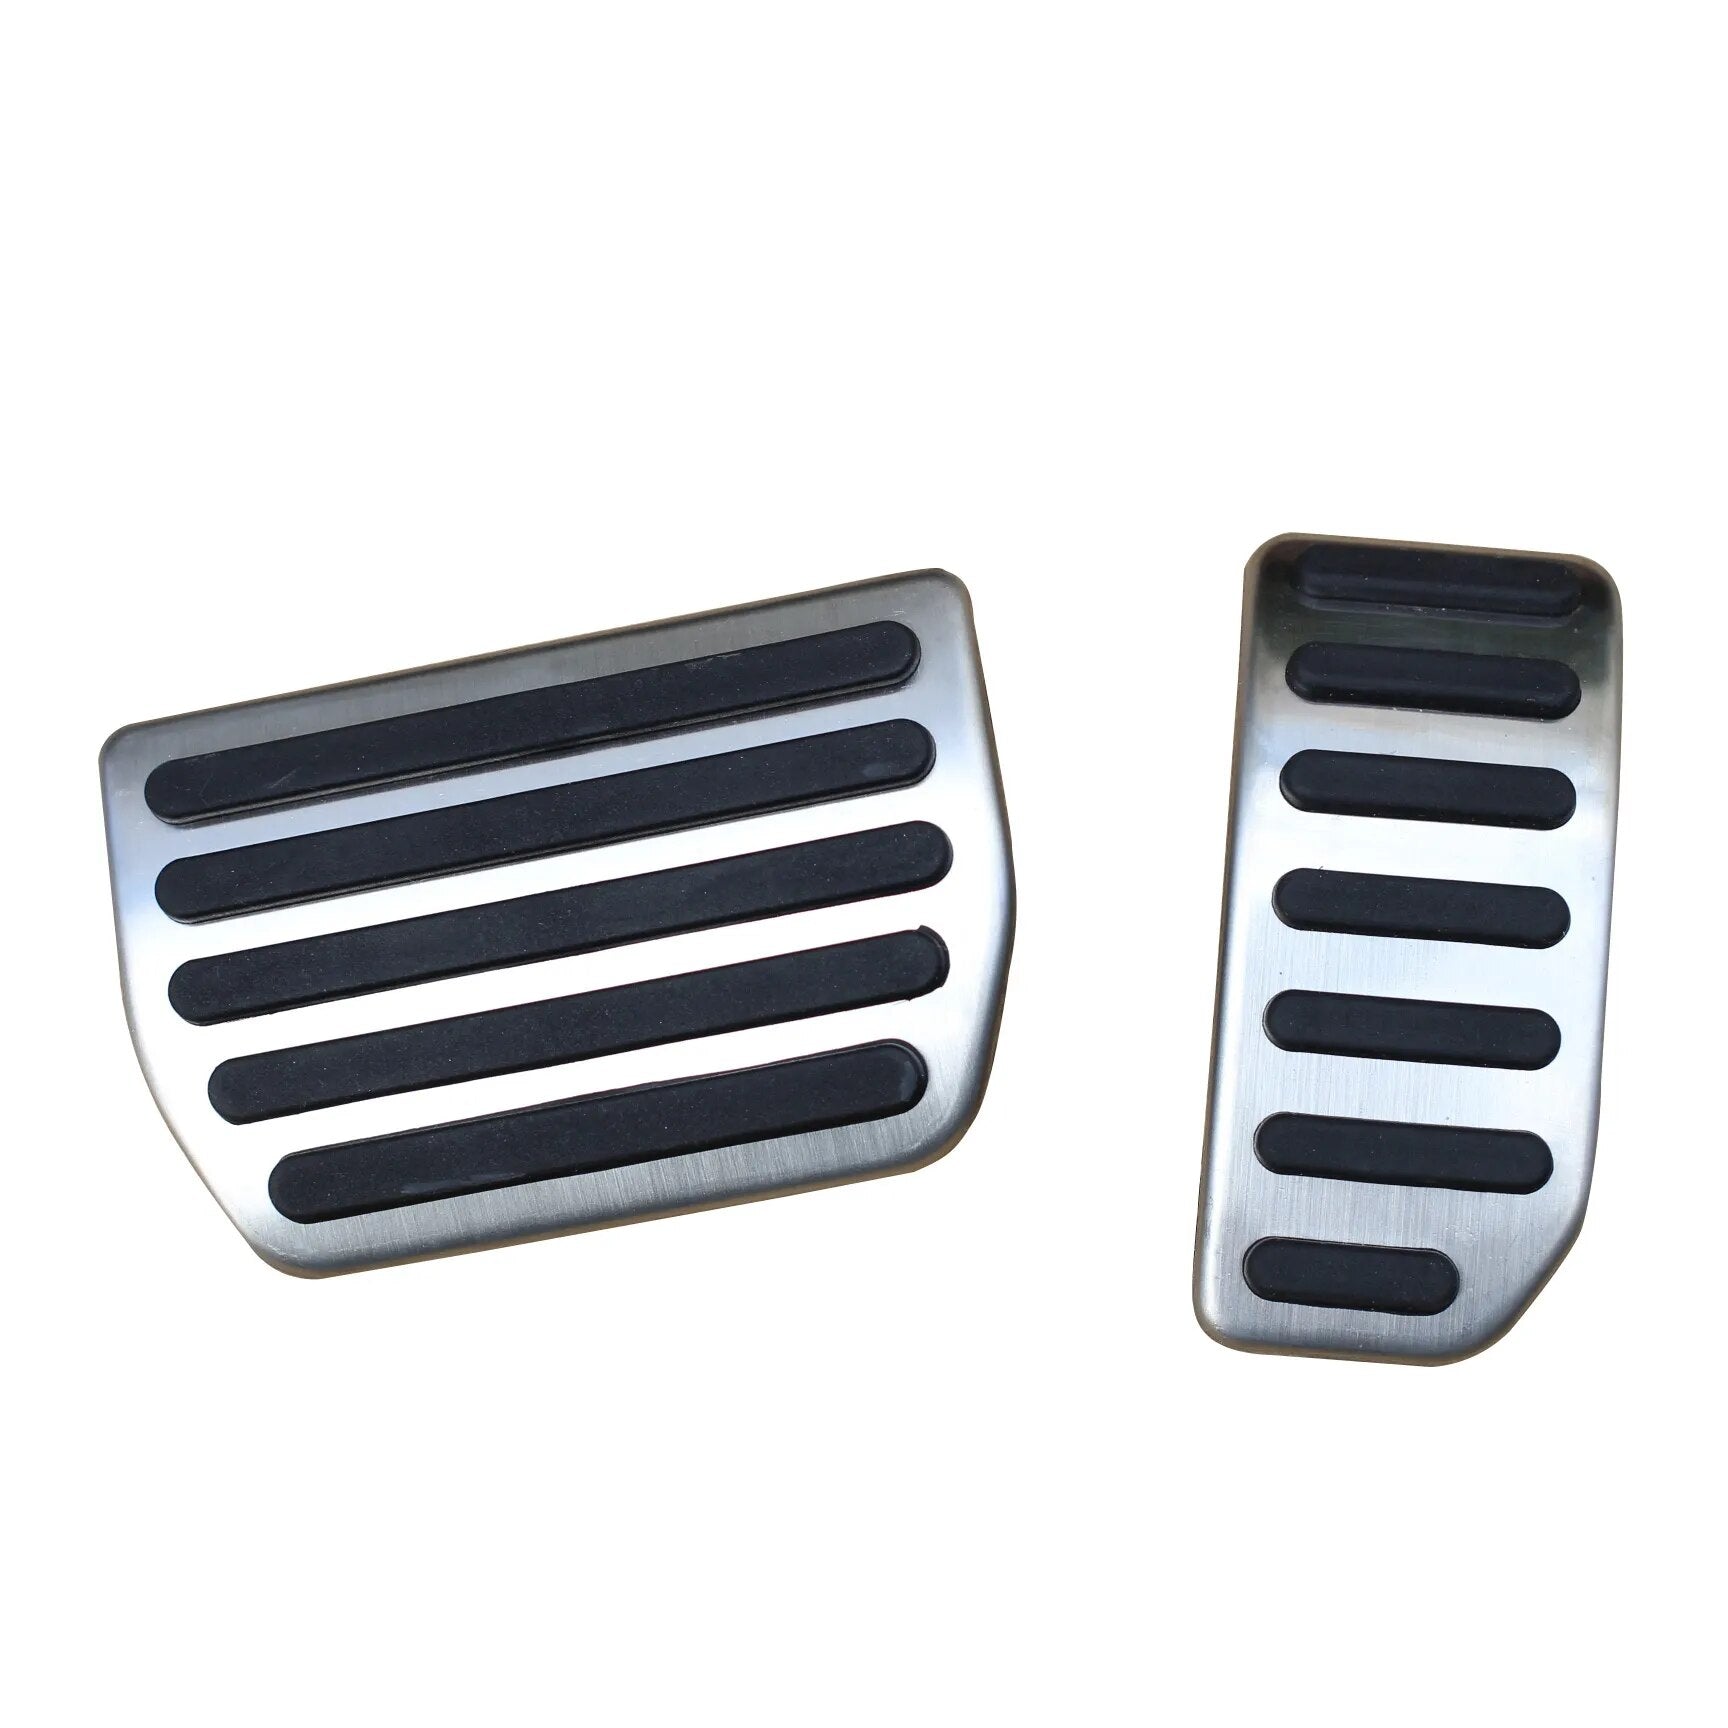 For Volvo S60 V60 XC60 S80 Automatic Stainless Steel Foot Gas Brake Accelerator Pedal Pad Cover